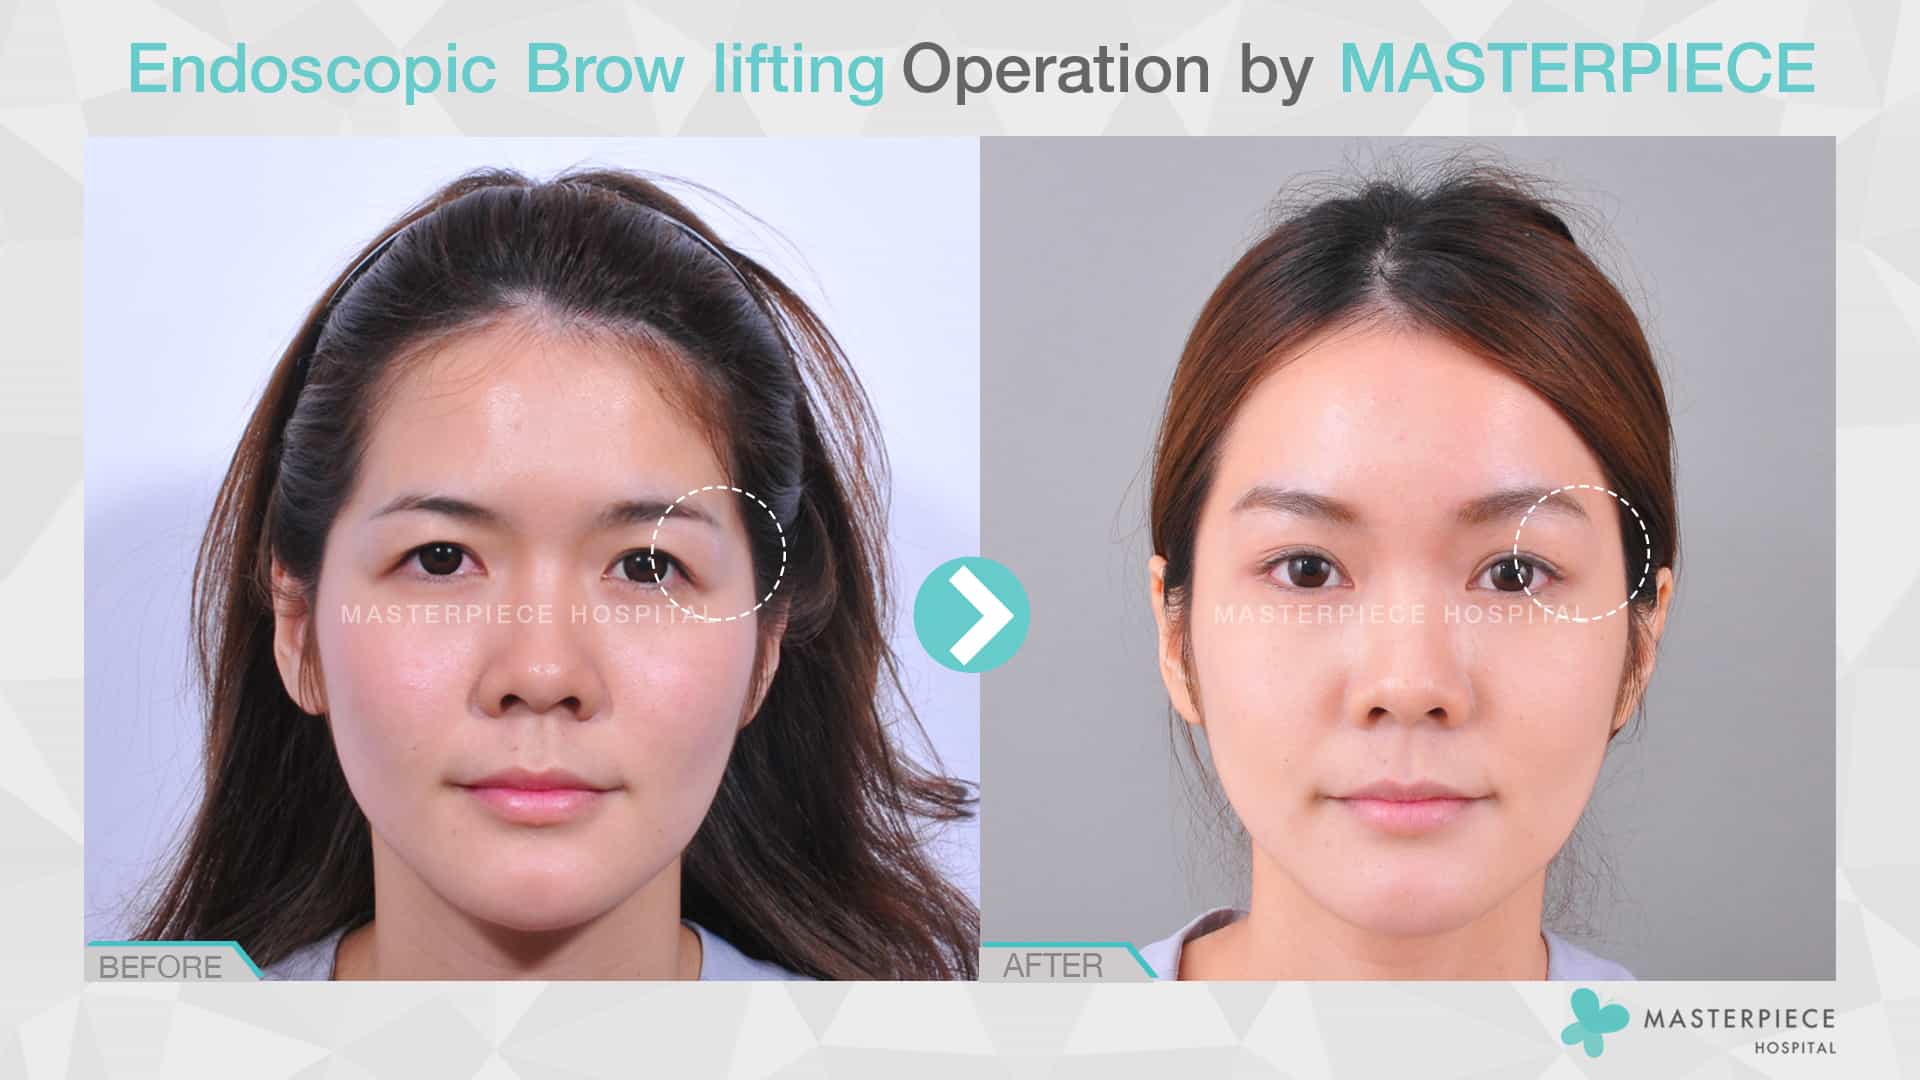 Endoscopic Brow lifting Operation by Masterpiece Hospital